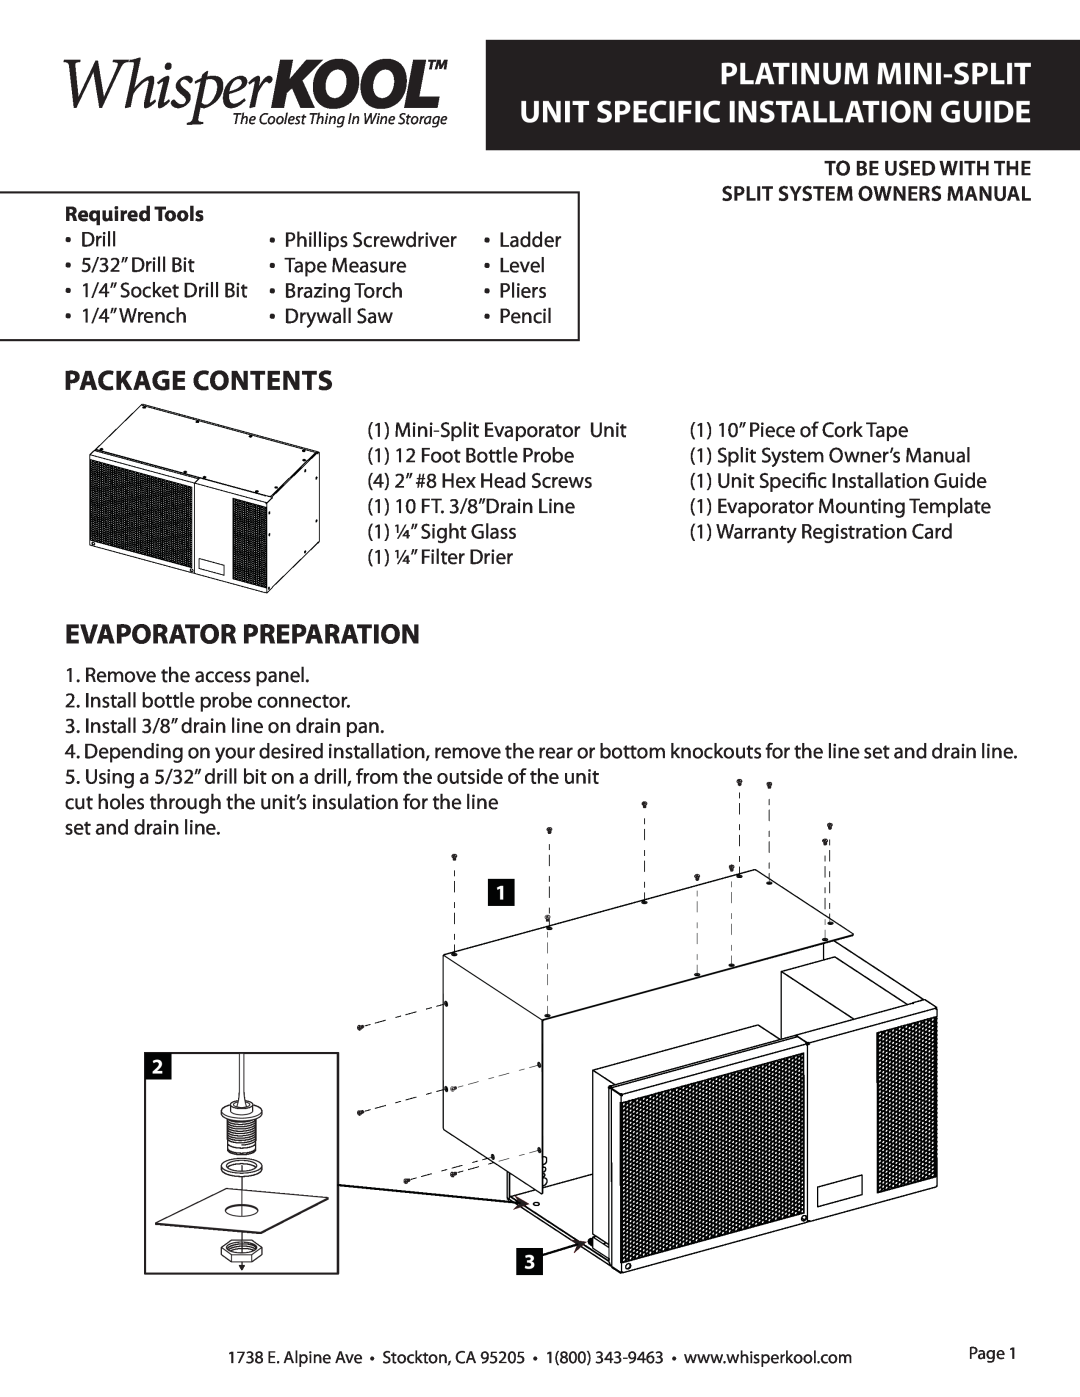 WhisperKool 2PMS-01, 042610 owner manual Package Contents, Evaporator Preparation, Required Tools, 1 2 